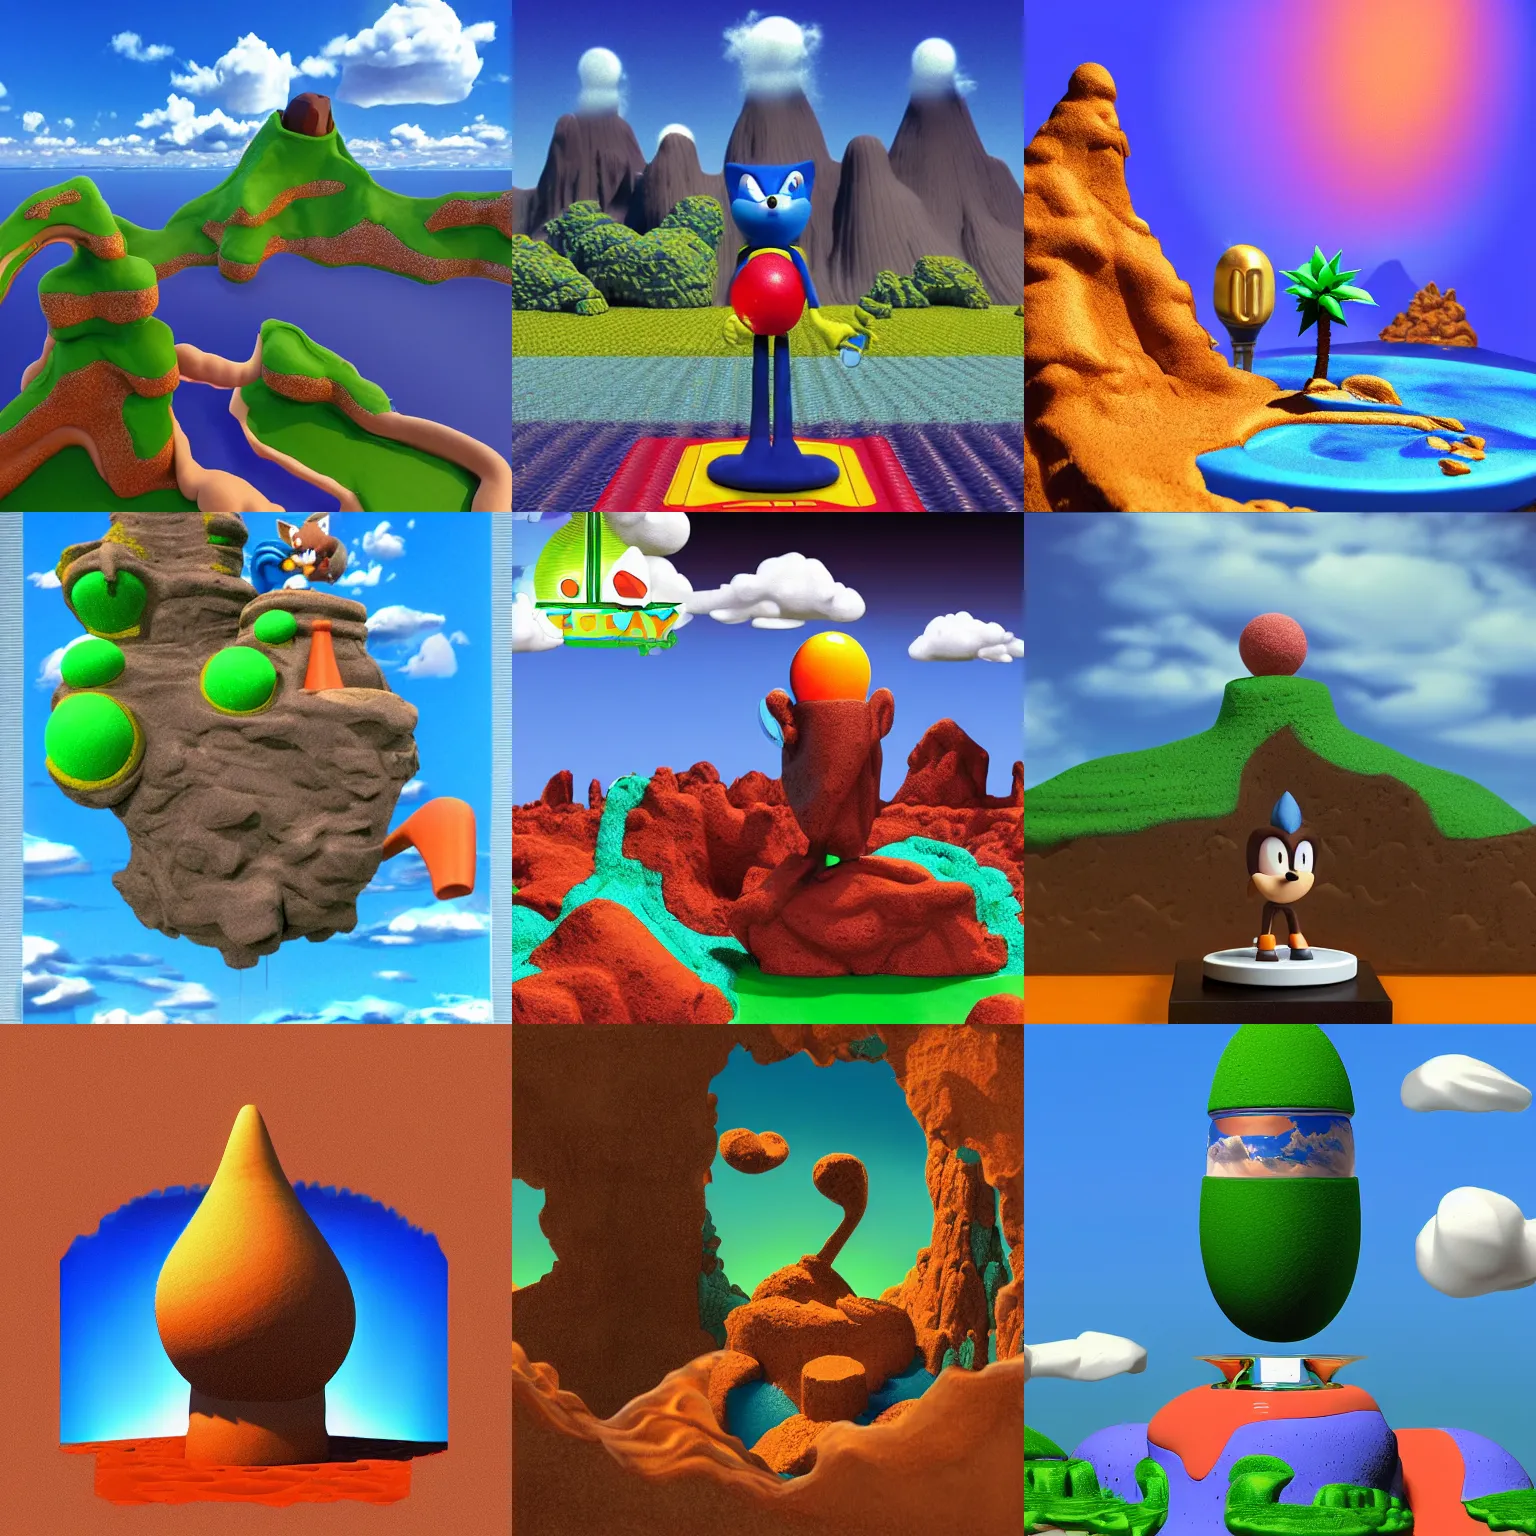 Prompt: clay sonic the hedgehog giant clay portrait sonic the hedgehog towering above the landscape, sega sonic stop motion claymation polaroid and surreal, liquid metal lava lamp prerendered 1 9 9 0 s 1 9 9 6 raytraced terragen phong shading checkerboard